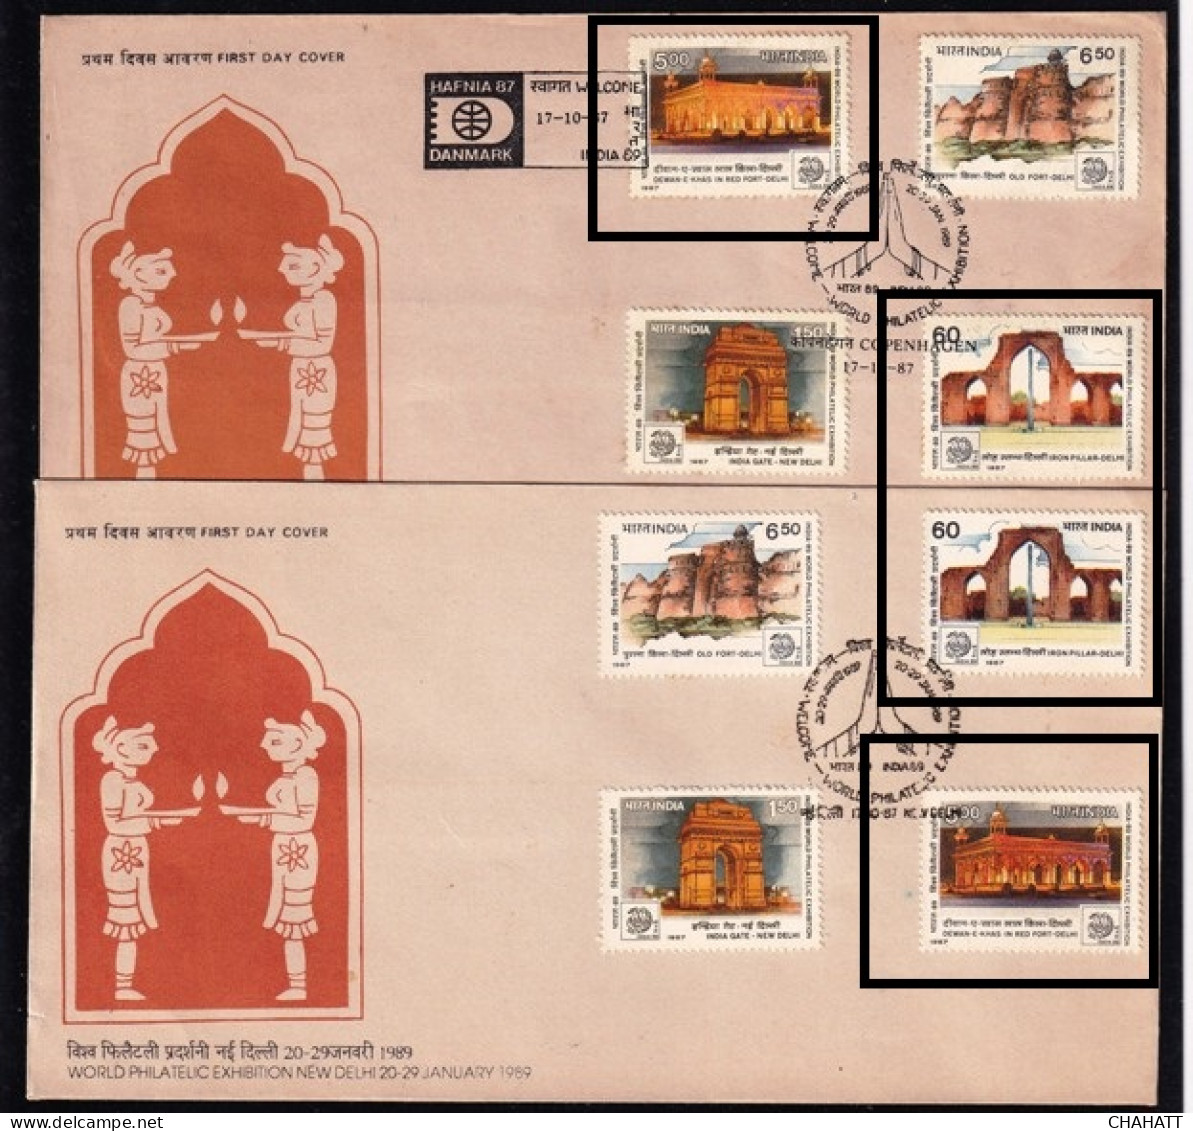 INDIA-1987-HERITAGE MONUMENTS- SET OF FDCs -CANCELLED IN INDIA AND DENMARK- ERROR- COLOR VARIETIES-BX4-17 - Errors, Freaks & Oddities (EFO)